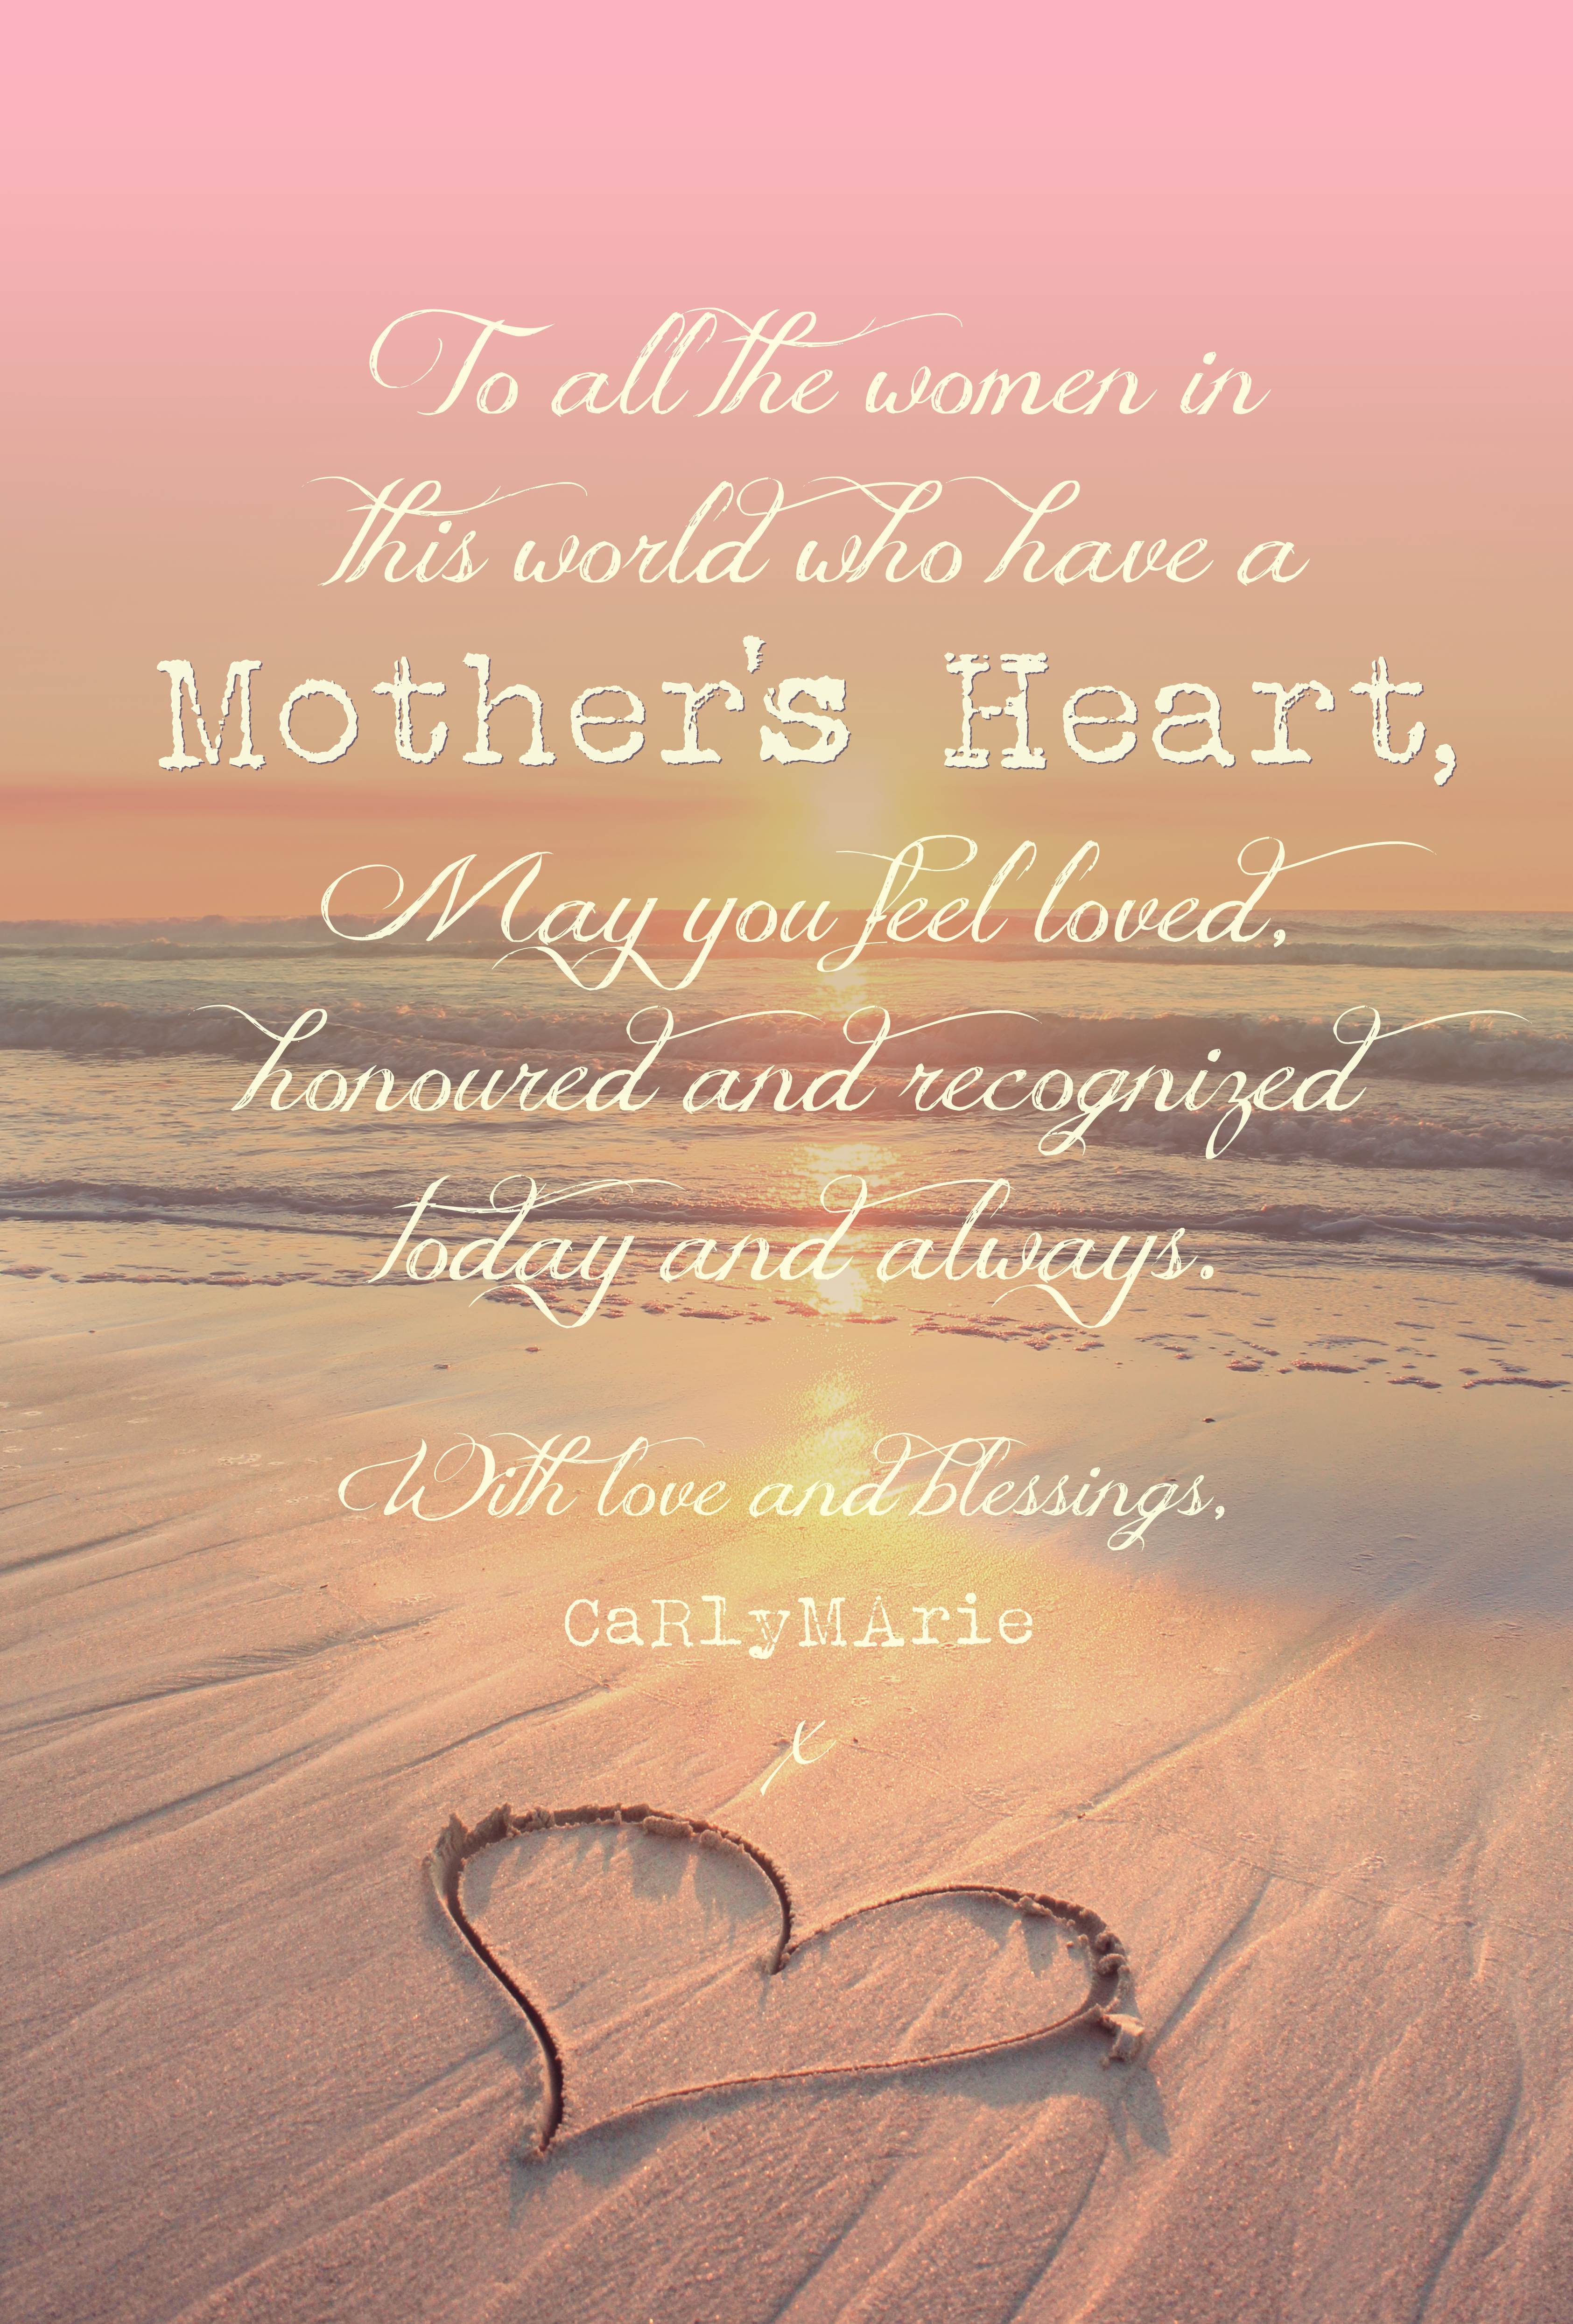 Bereavement Loss Of Mother Quotes. QuotesGram